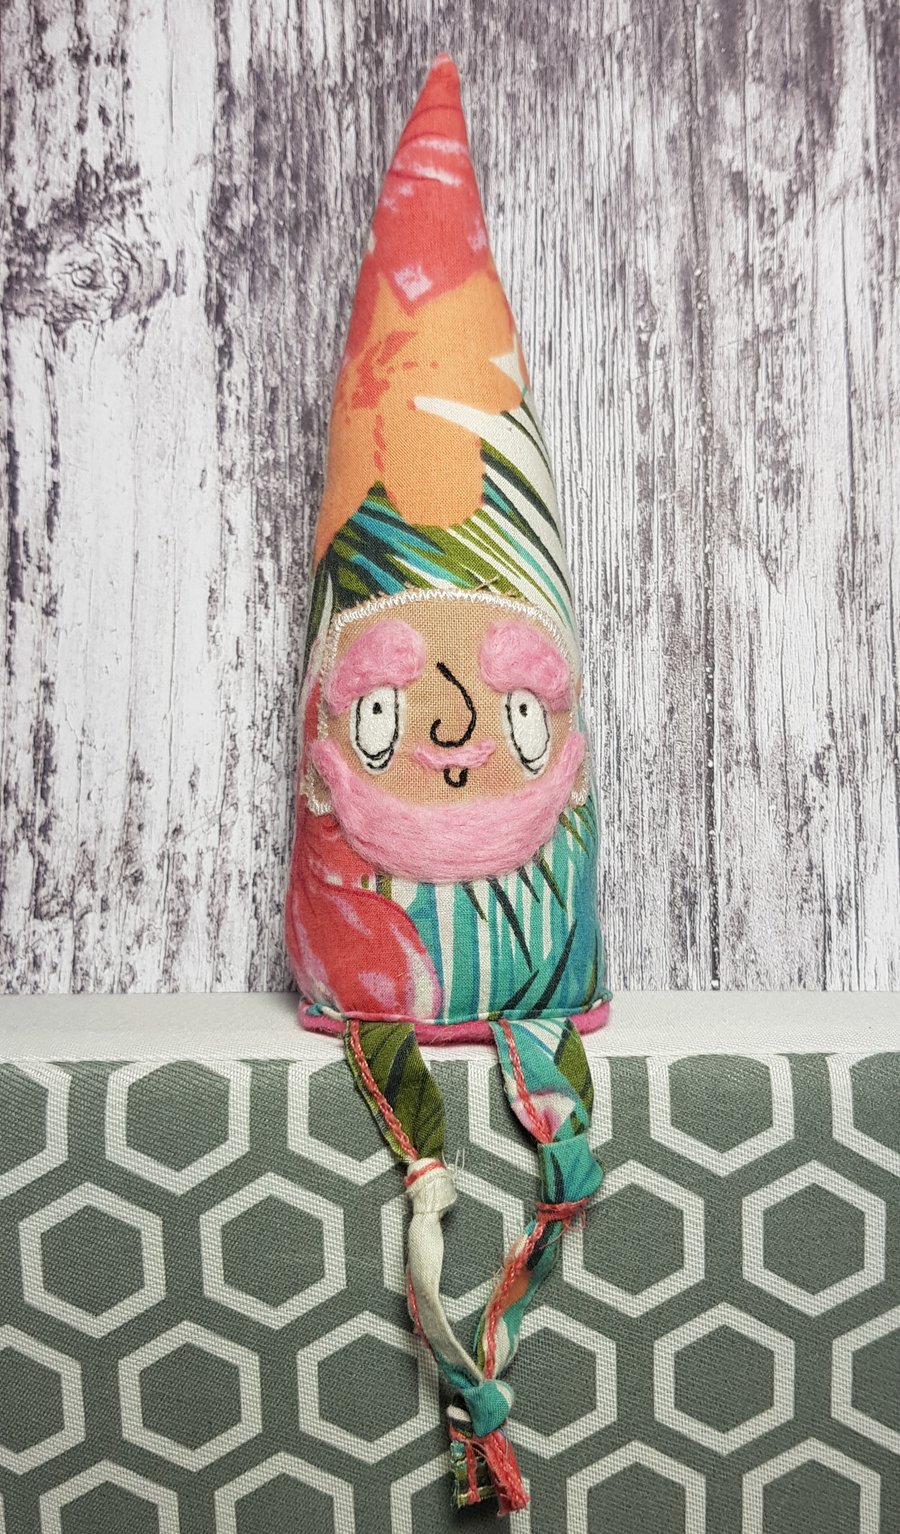 Upcycled Gnome in Tropical Floral Print. Bixby